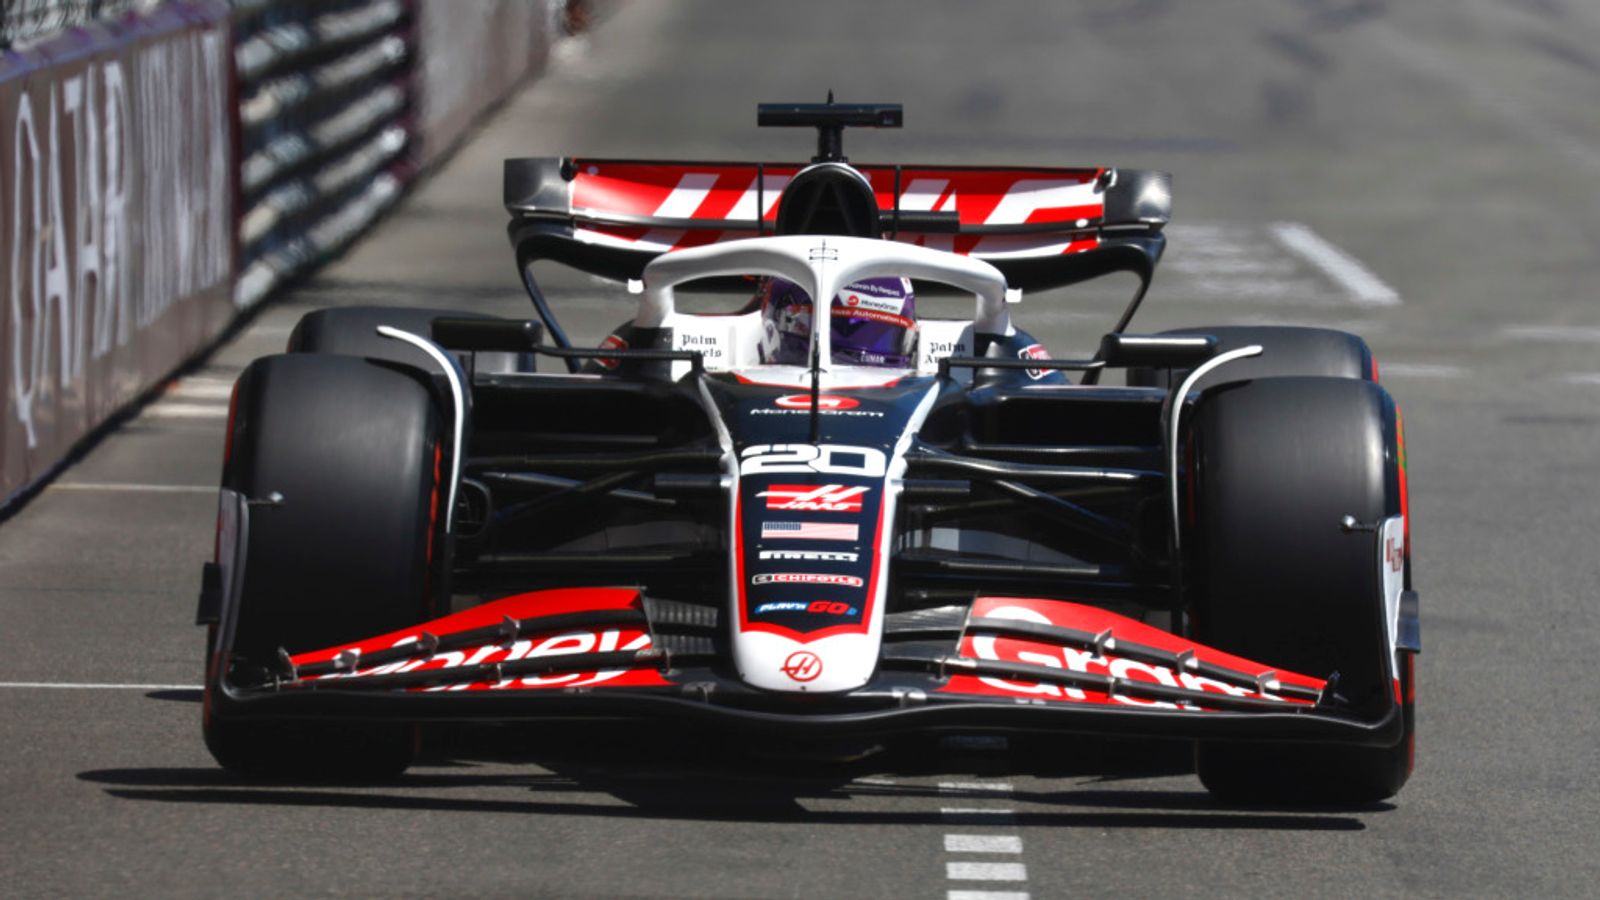 Monaco GP: Haas explain disqualification from Qualifying after technical breach on rear wing | F1 News